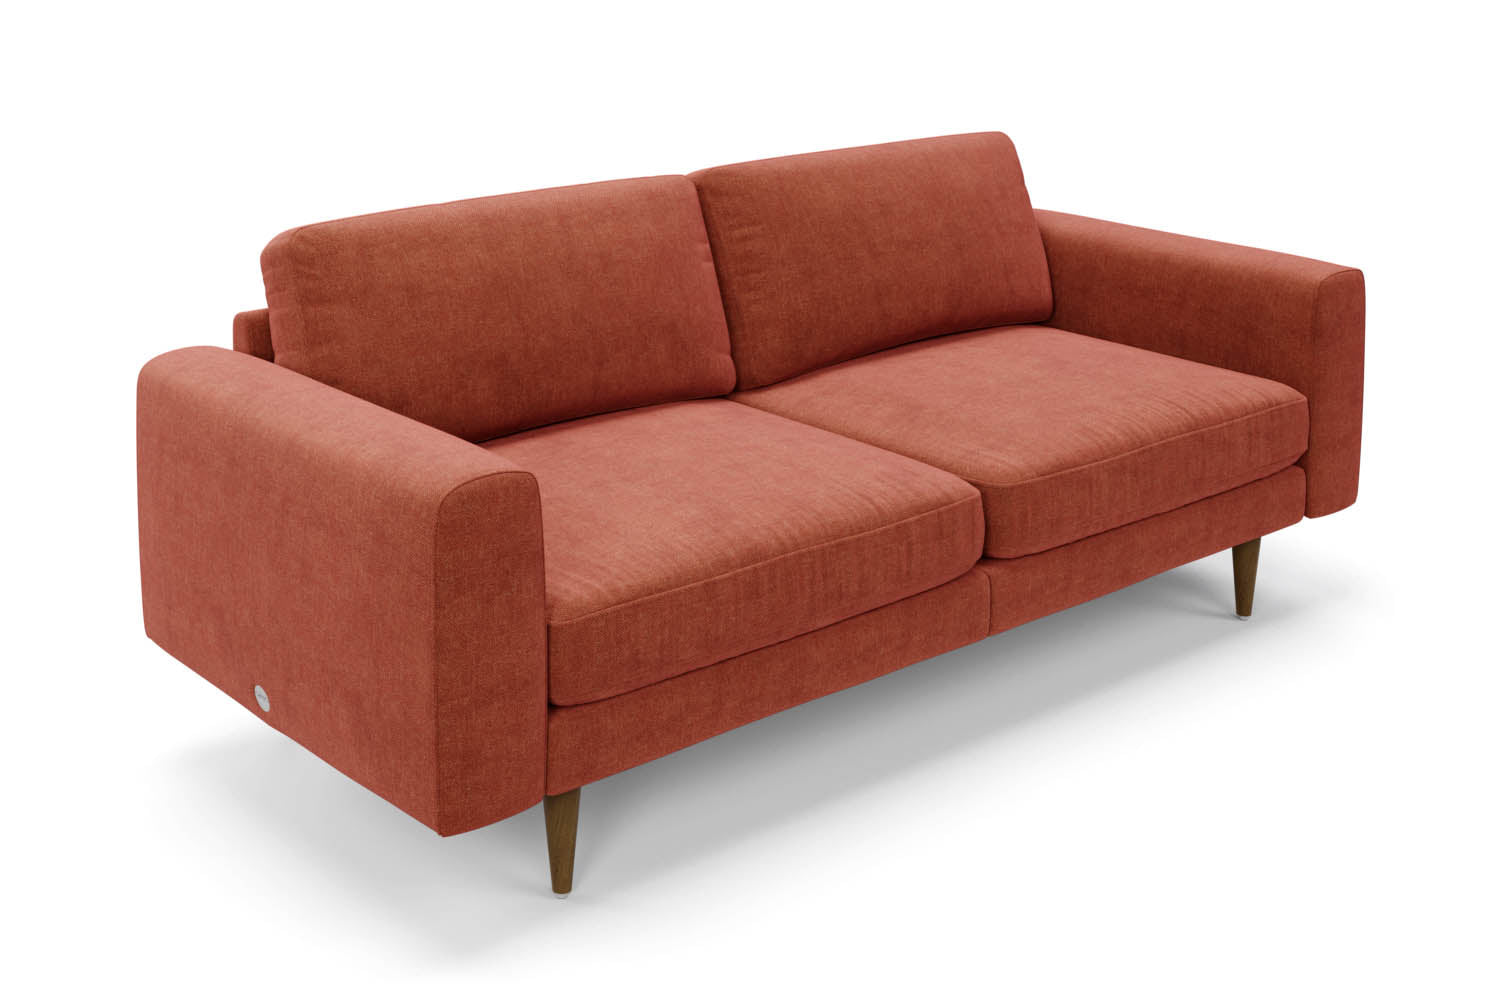 The Big Chill 3 Seater Sofa in Spice Chenille with brown legs